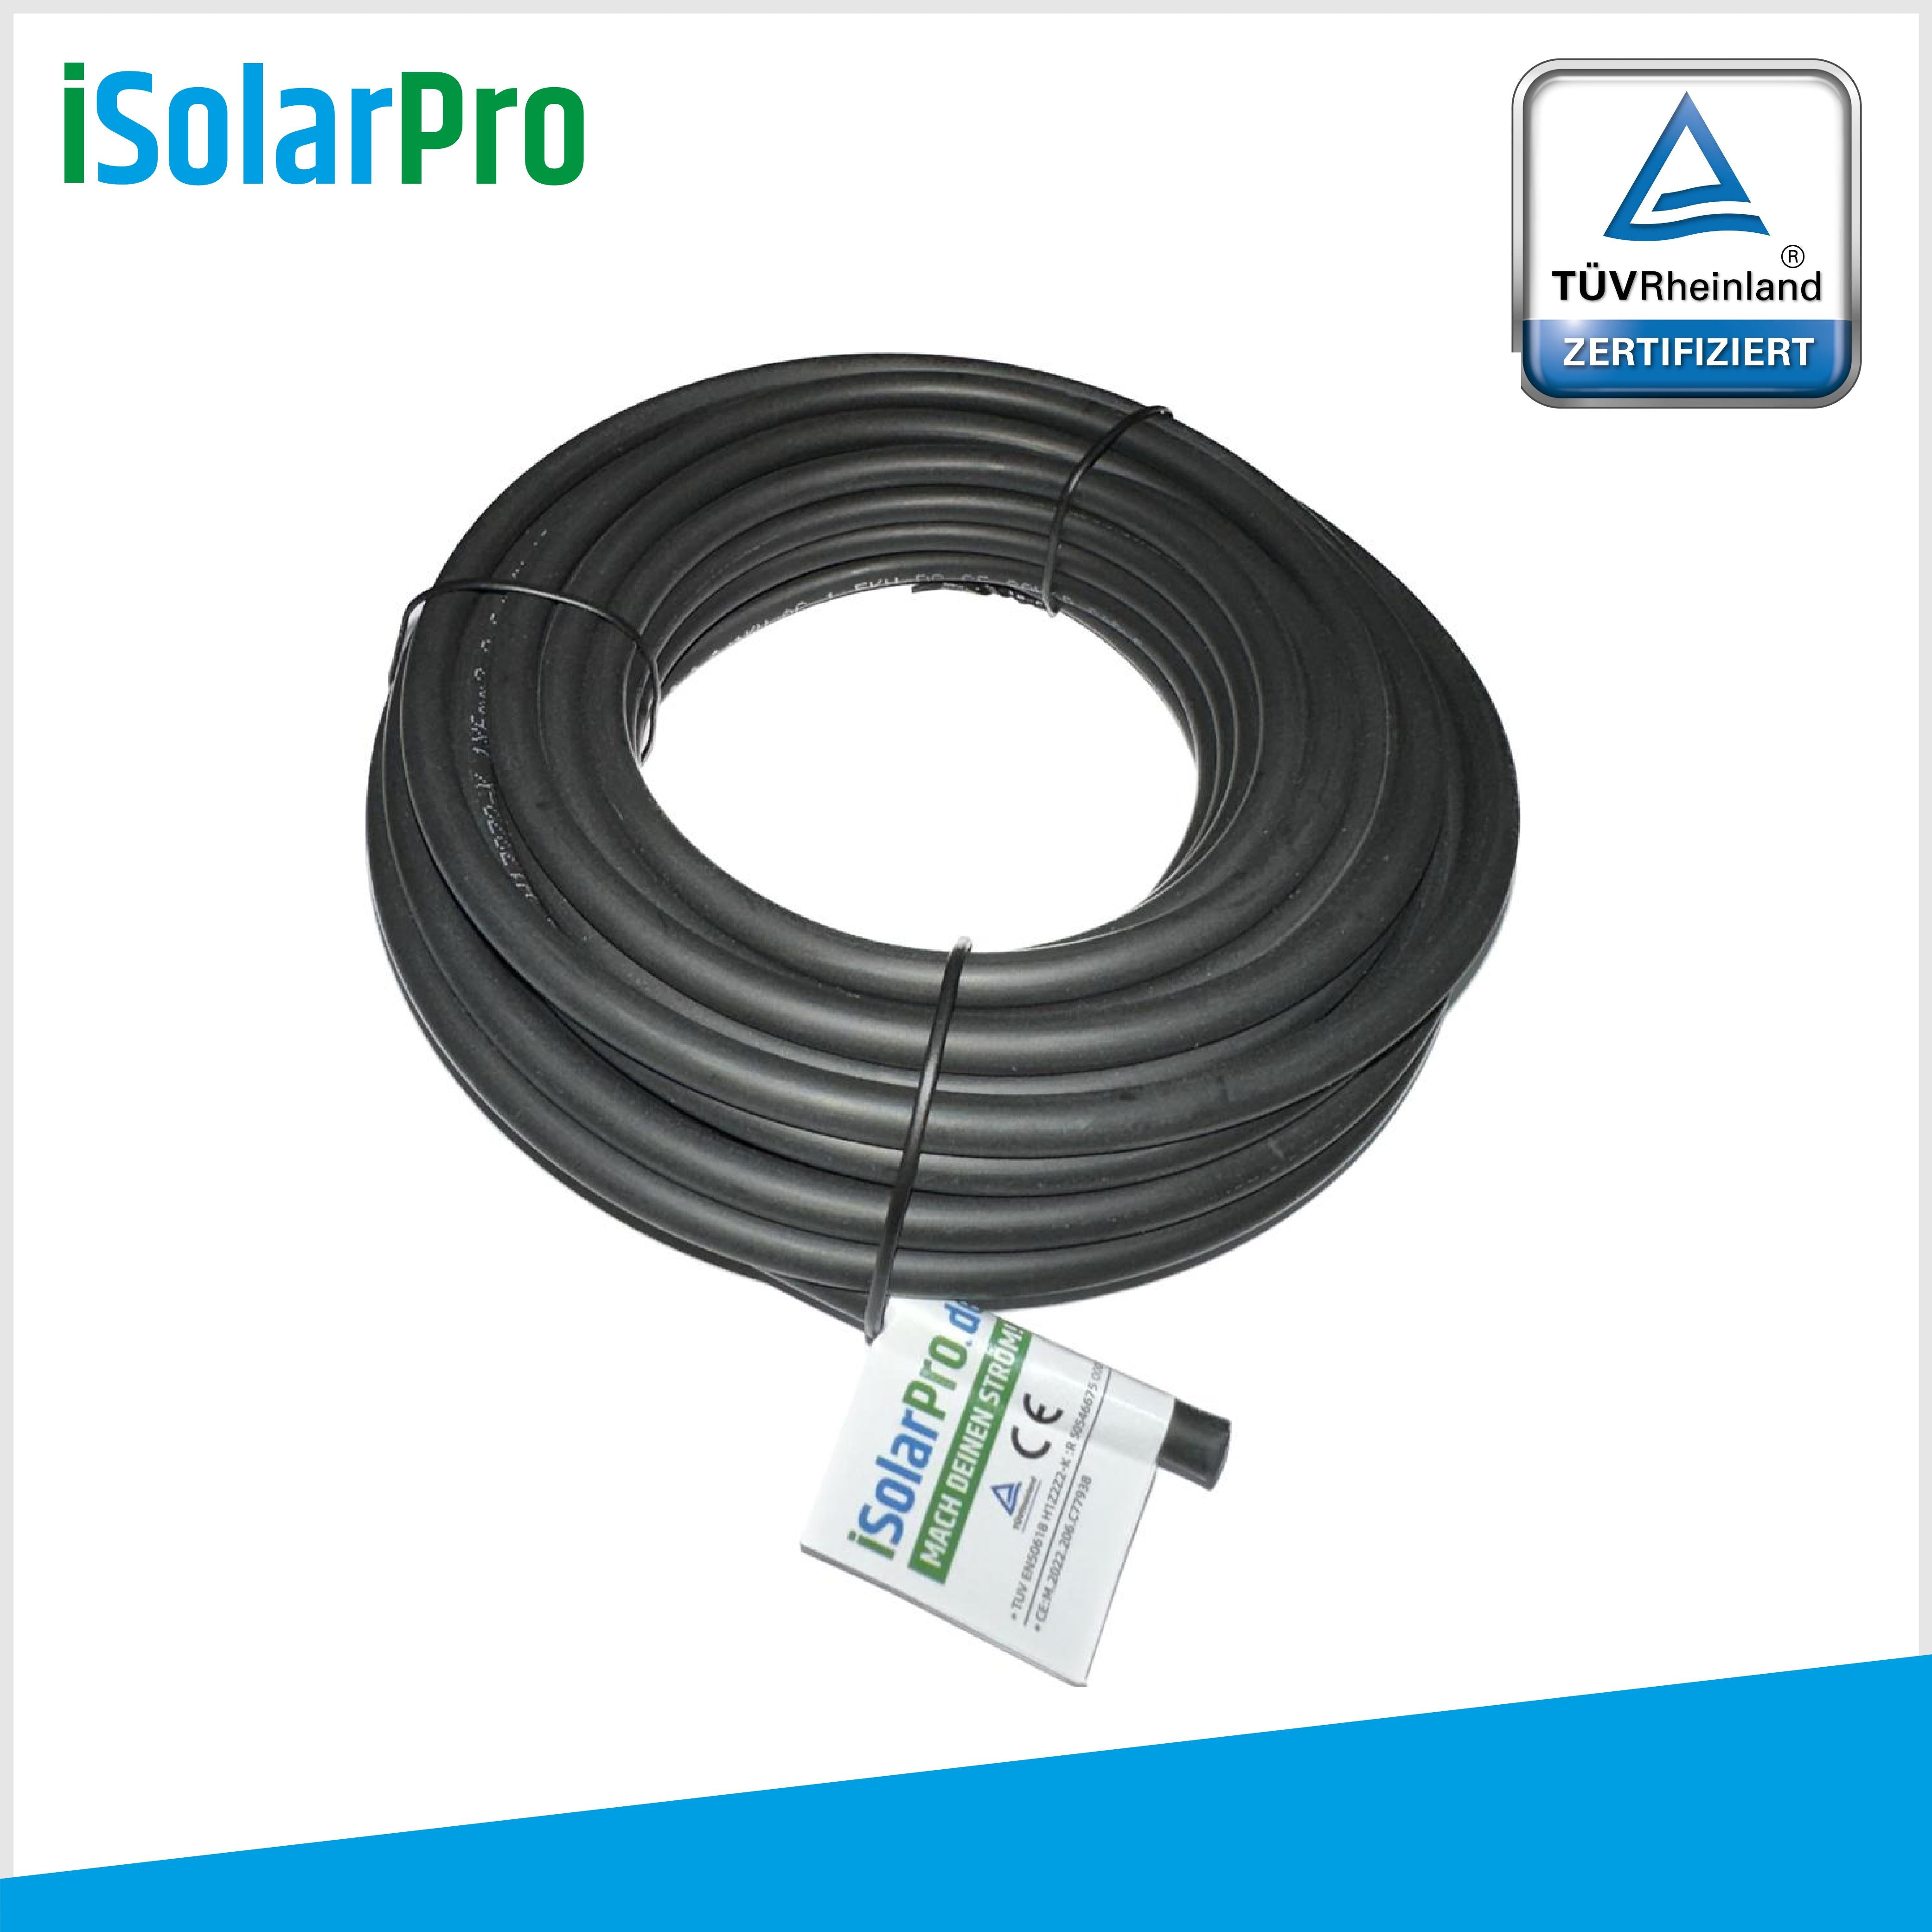 10m solar cable 6 mm² photovoltaic cable for PV systems black 